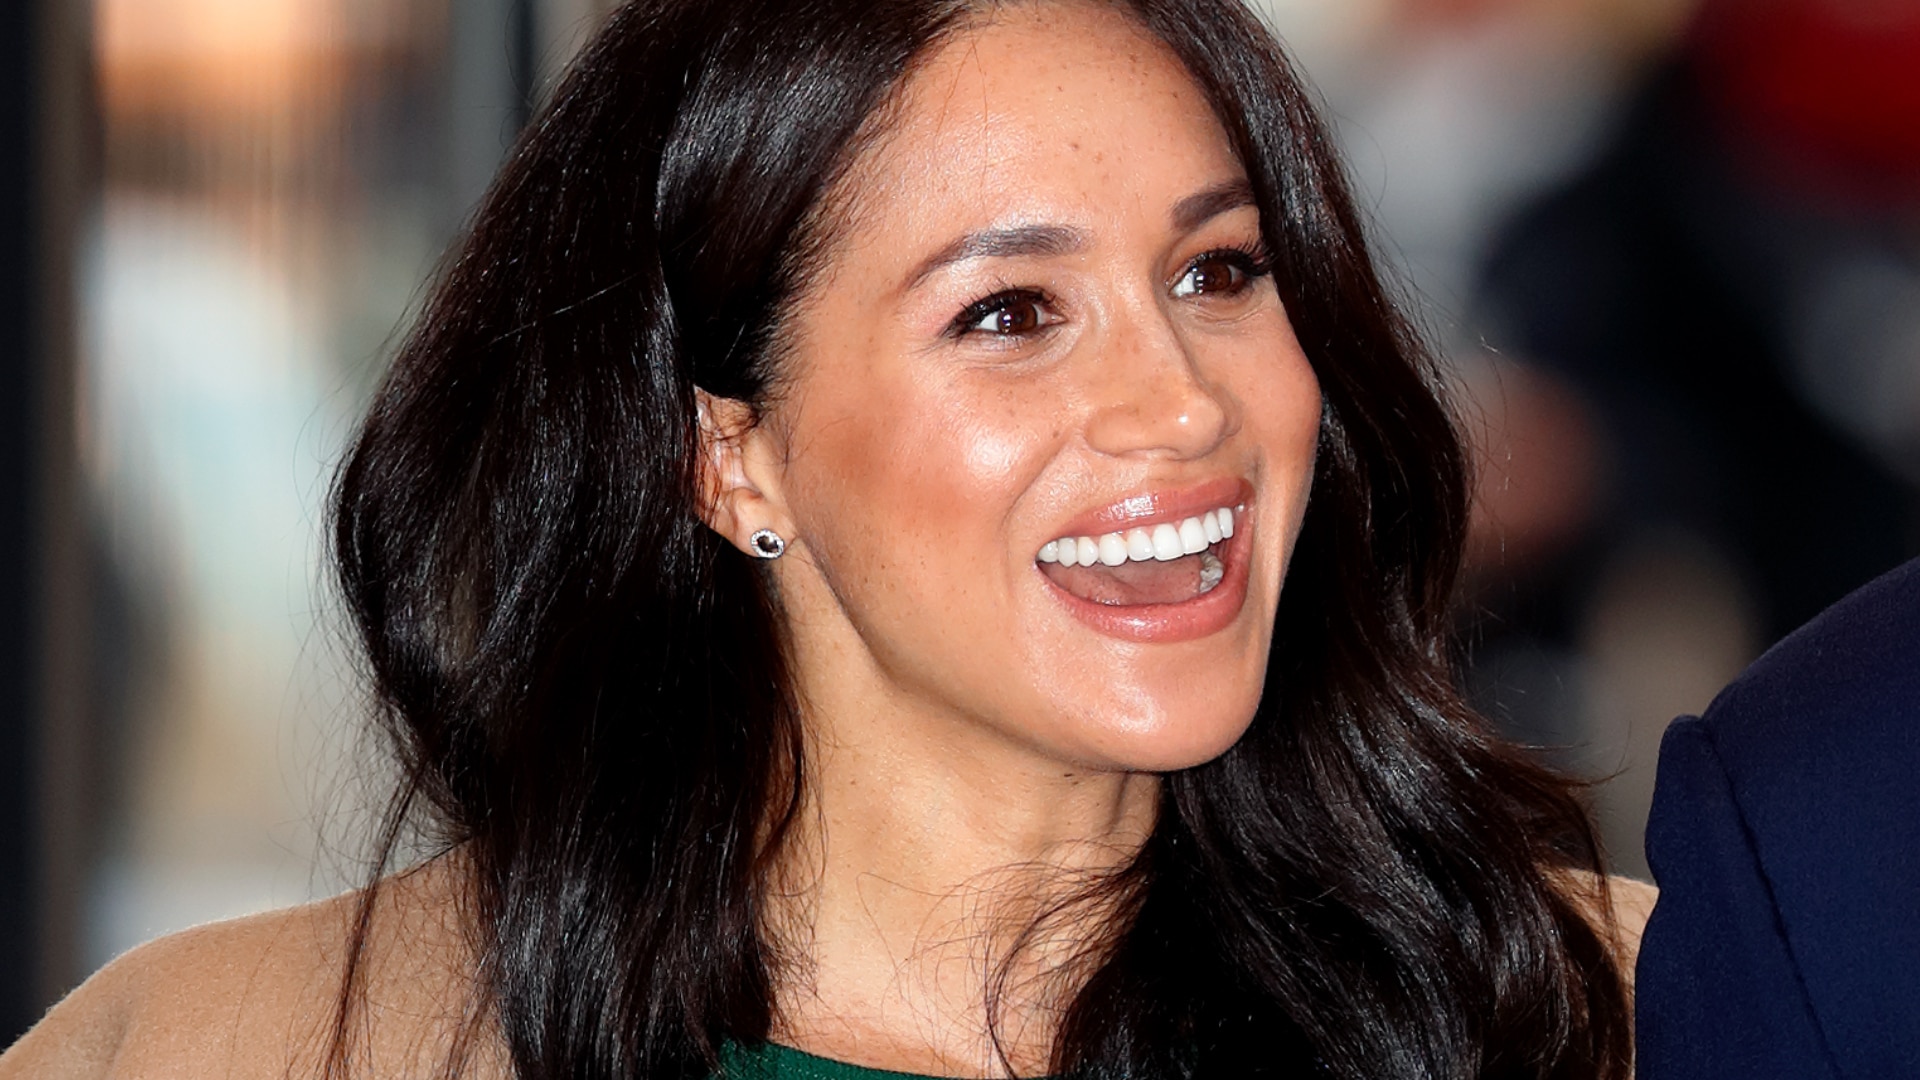 Watch Access Hollywood Interview: Meghan Markle Spotted Smiling In